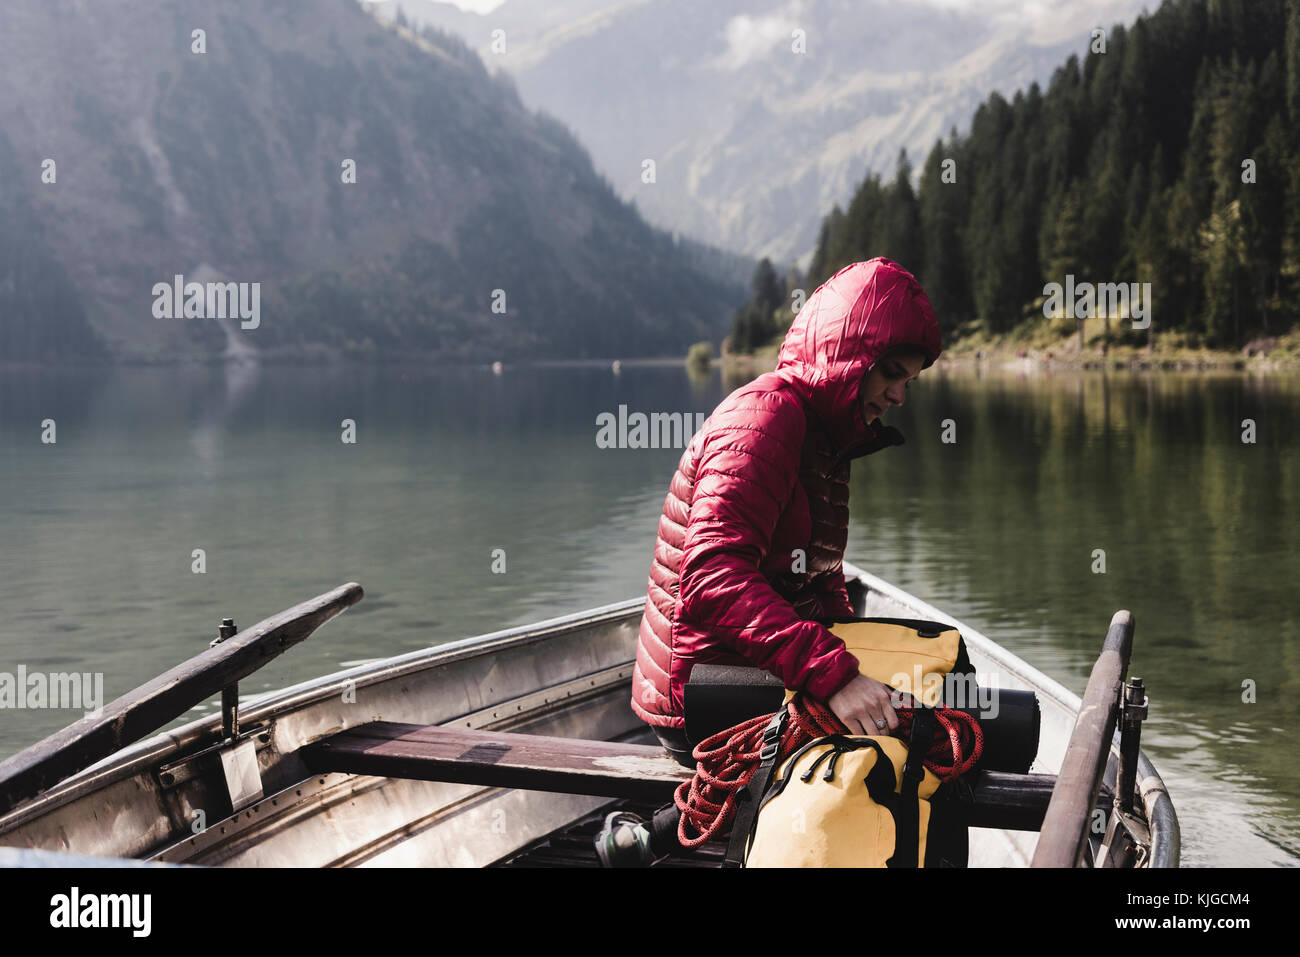 Austria, Tyrol, Alps, woman with backpack in boat on mountain lake Stock Photo